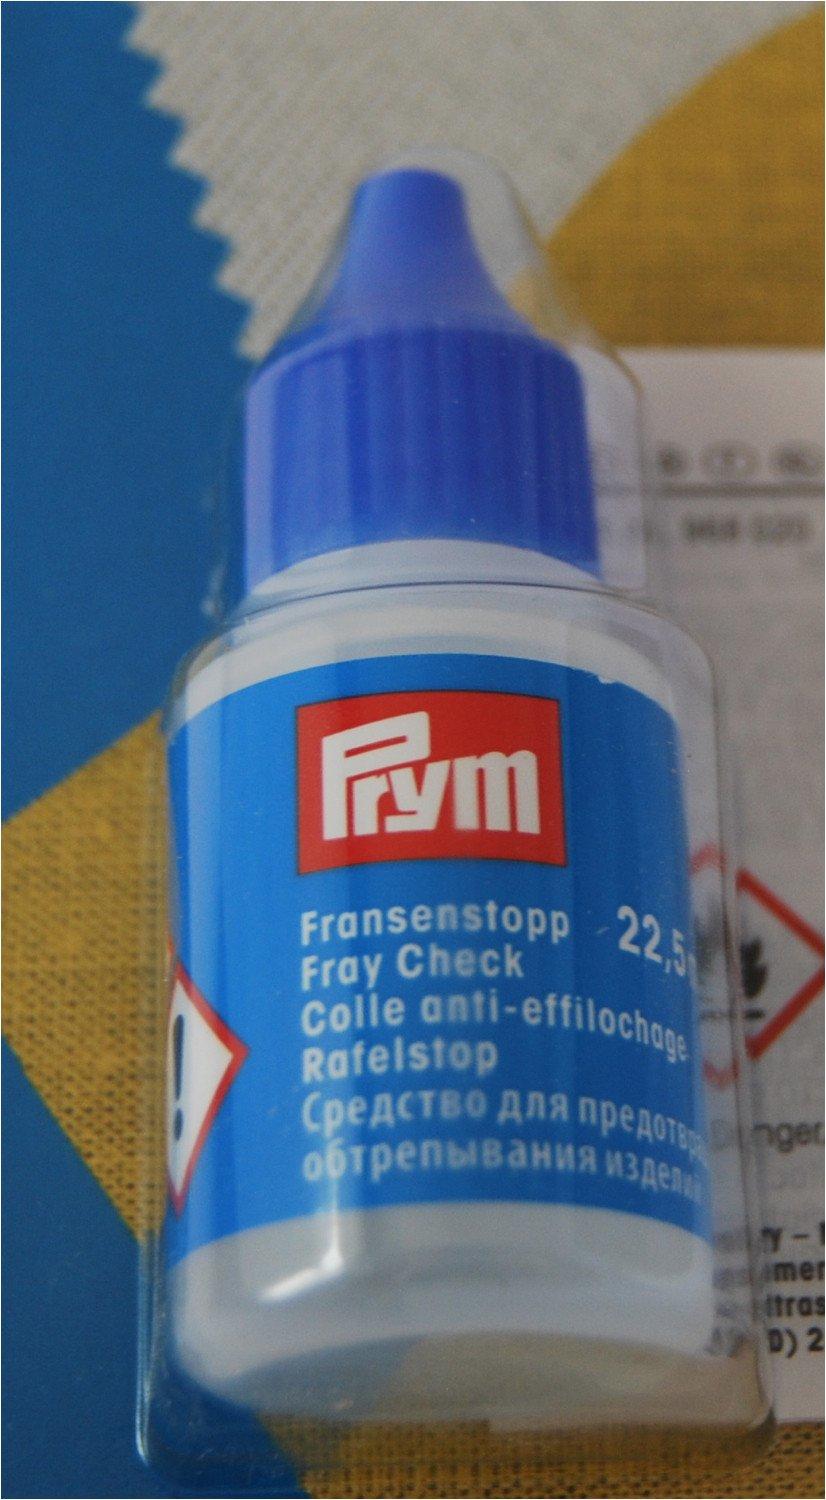 to prevent fraying use Prym Fray check anytime you cut a hole in your bag, when inserting a magnetic snap or bag lock